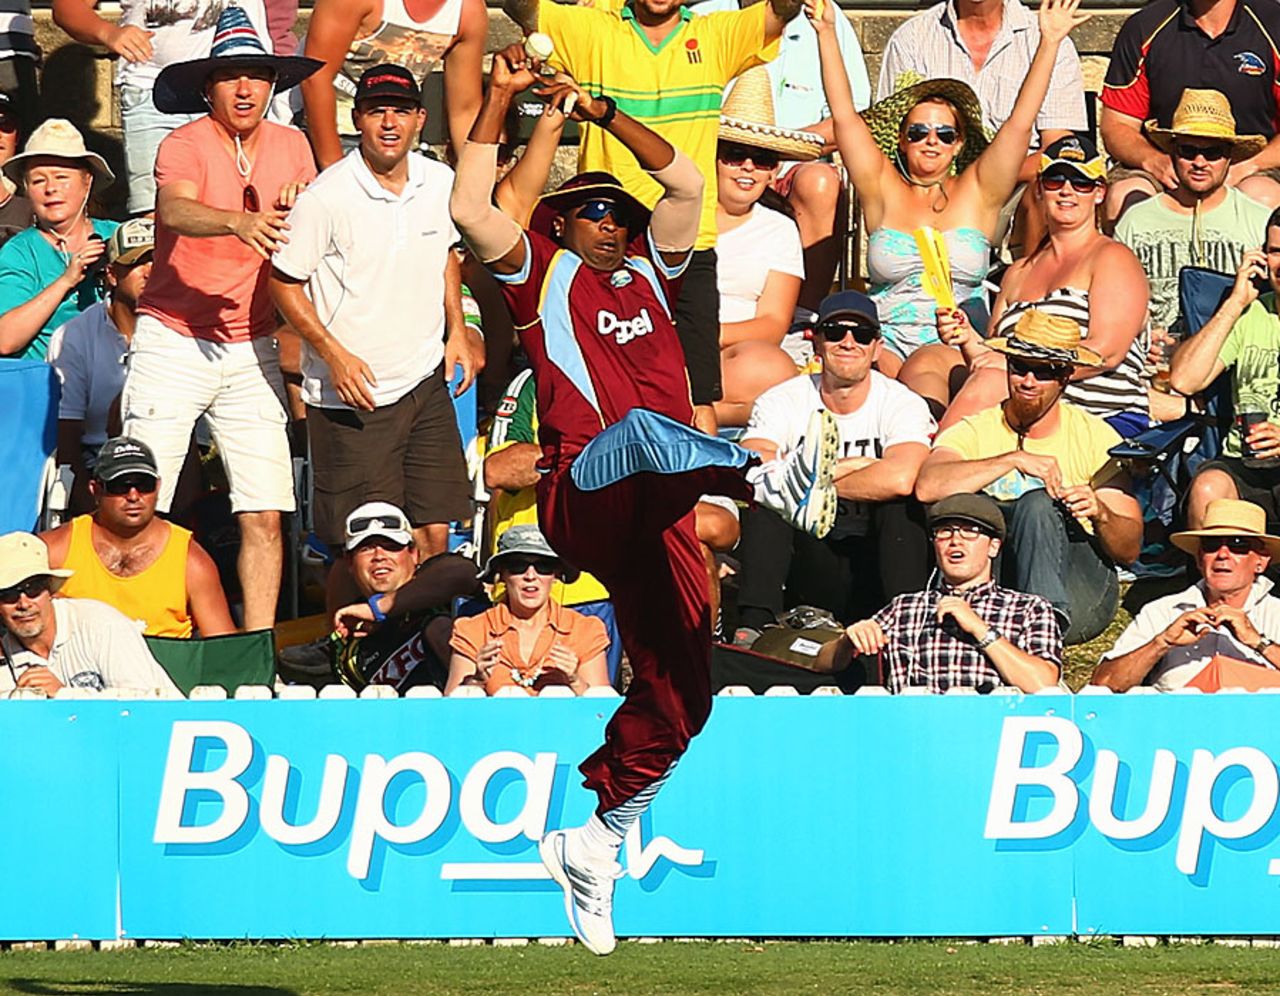 Kieron Pollard takes another brilliant catch at the boundary to dismiss George Bailey, Australia v West Indies, 3rd ODI, Canberra, February 6, 2013